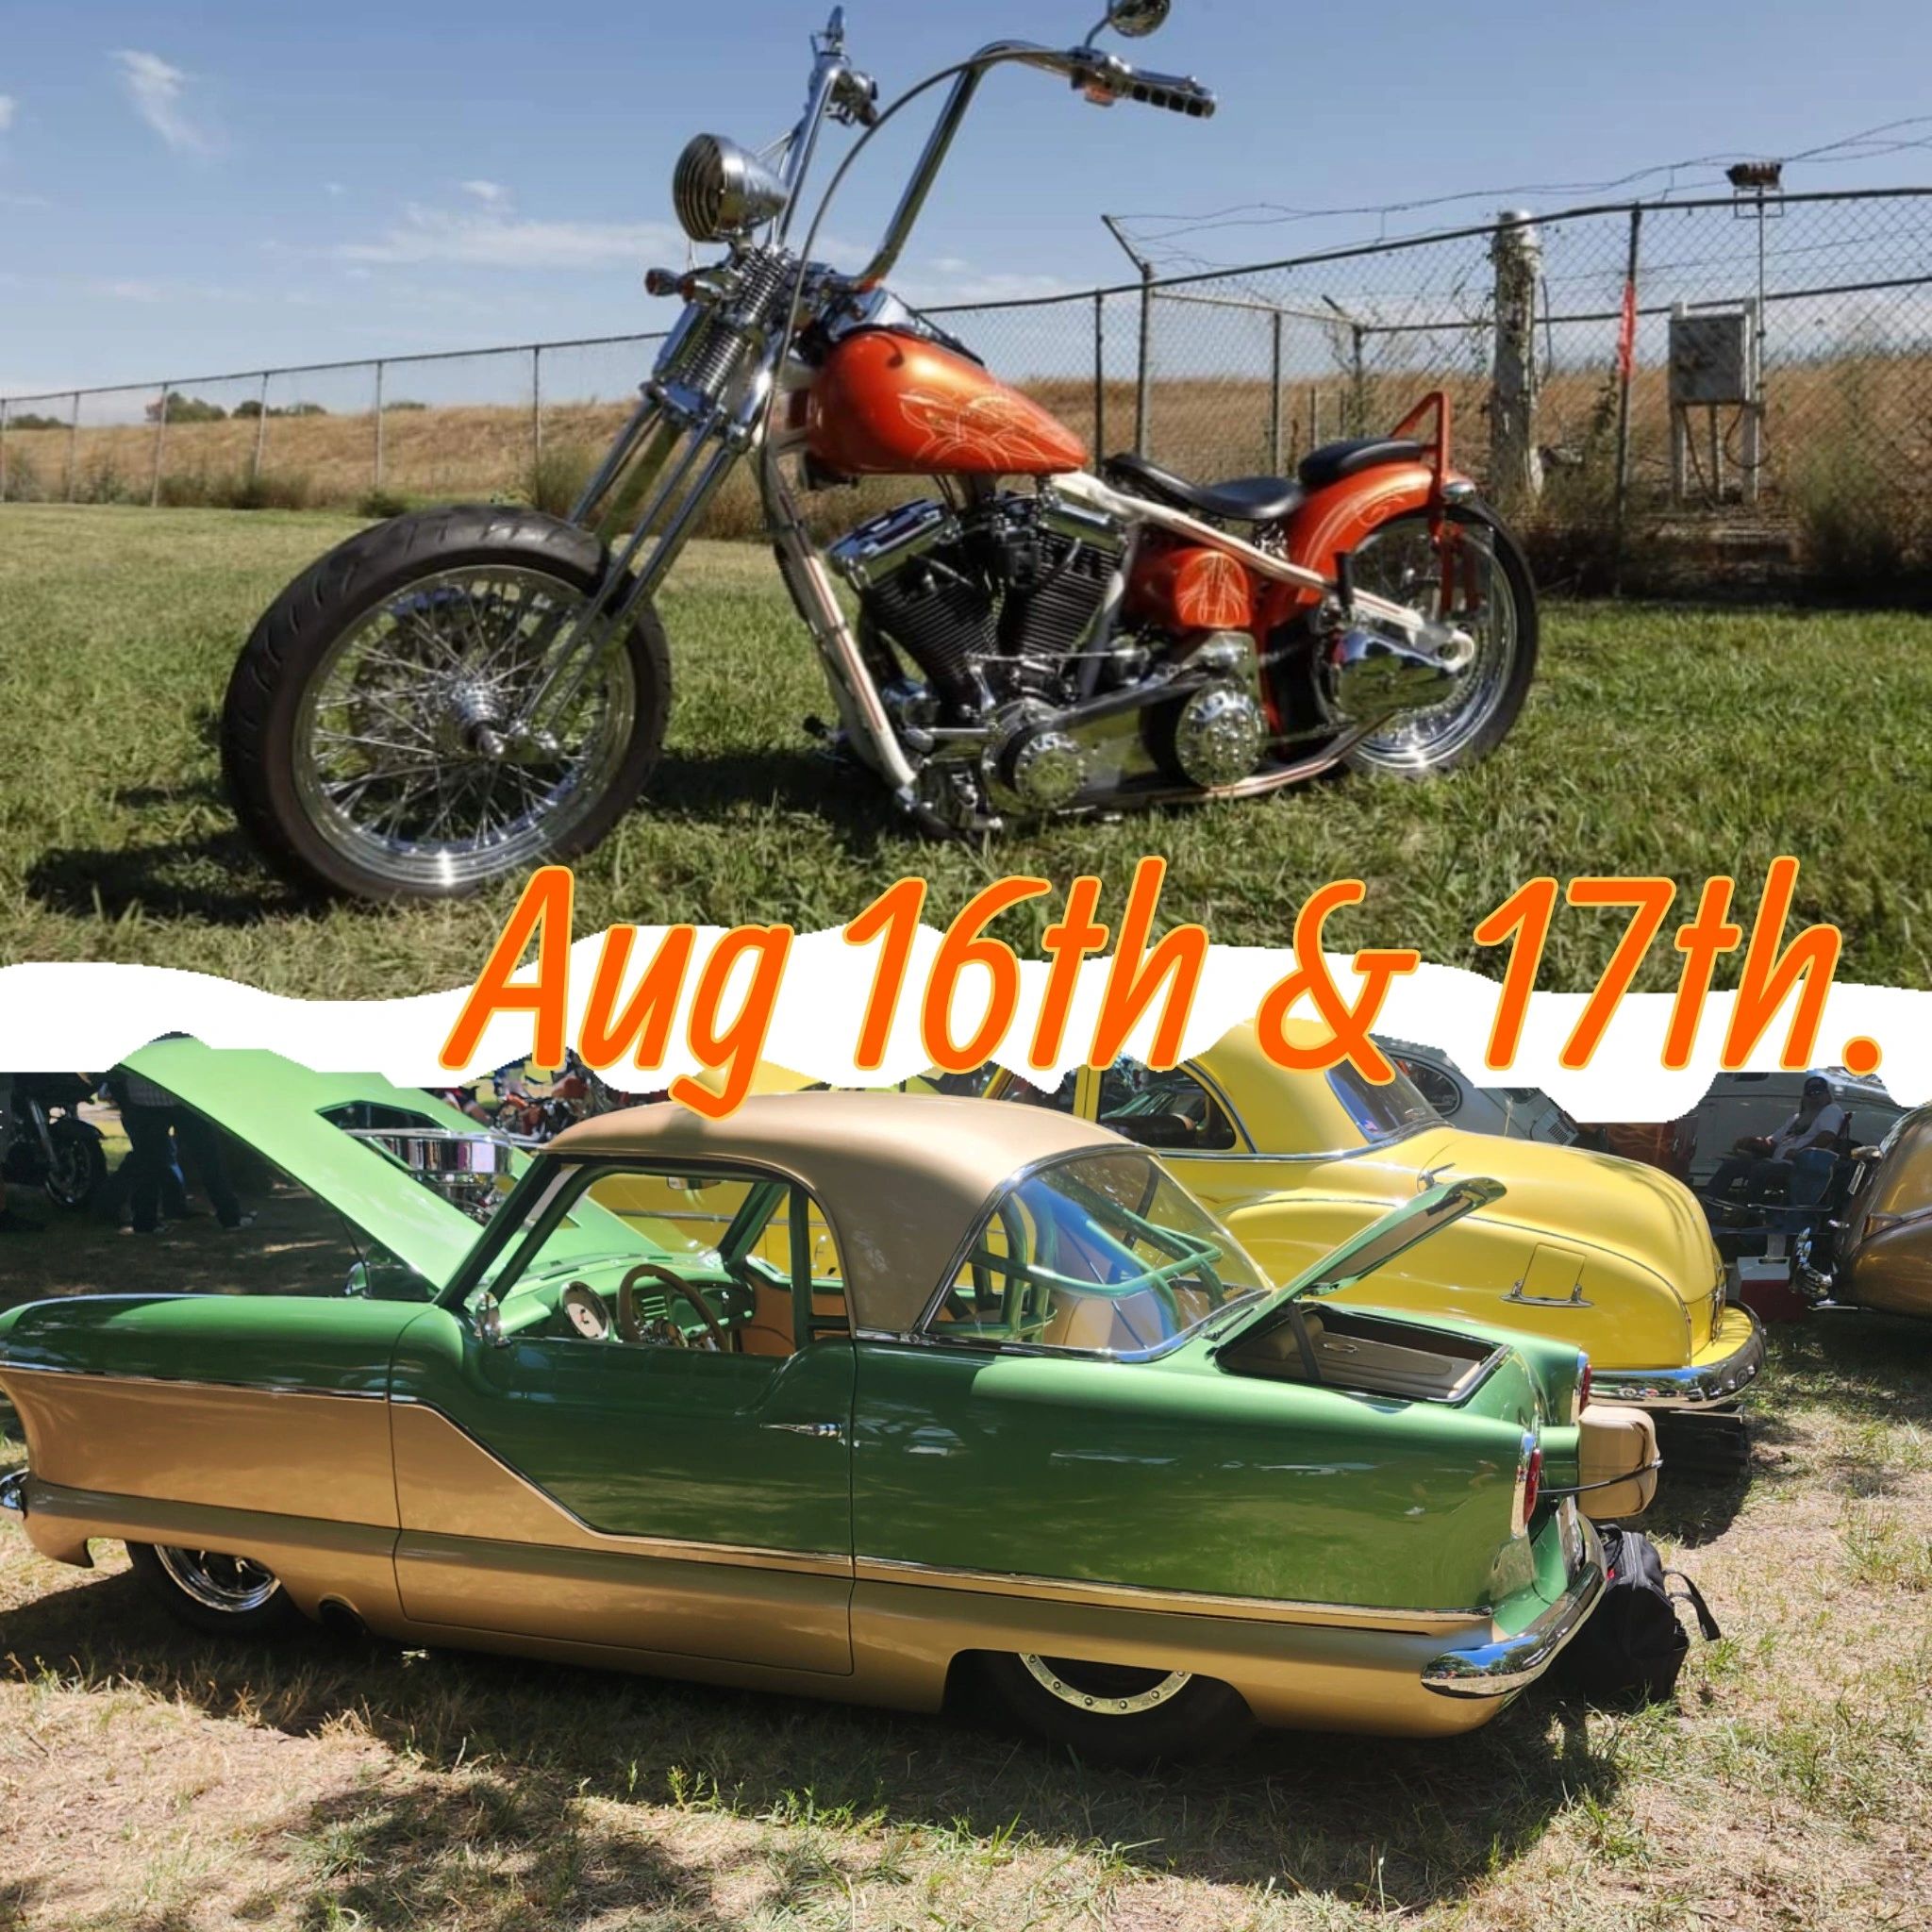 Willows Car and Bike Show